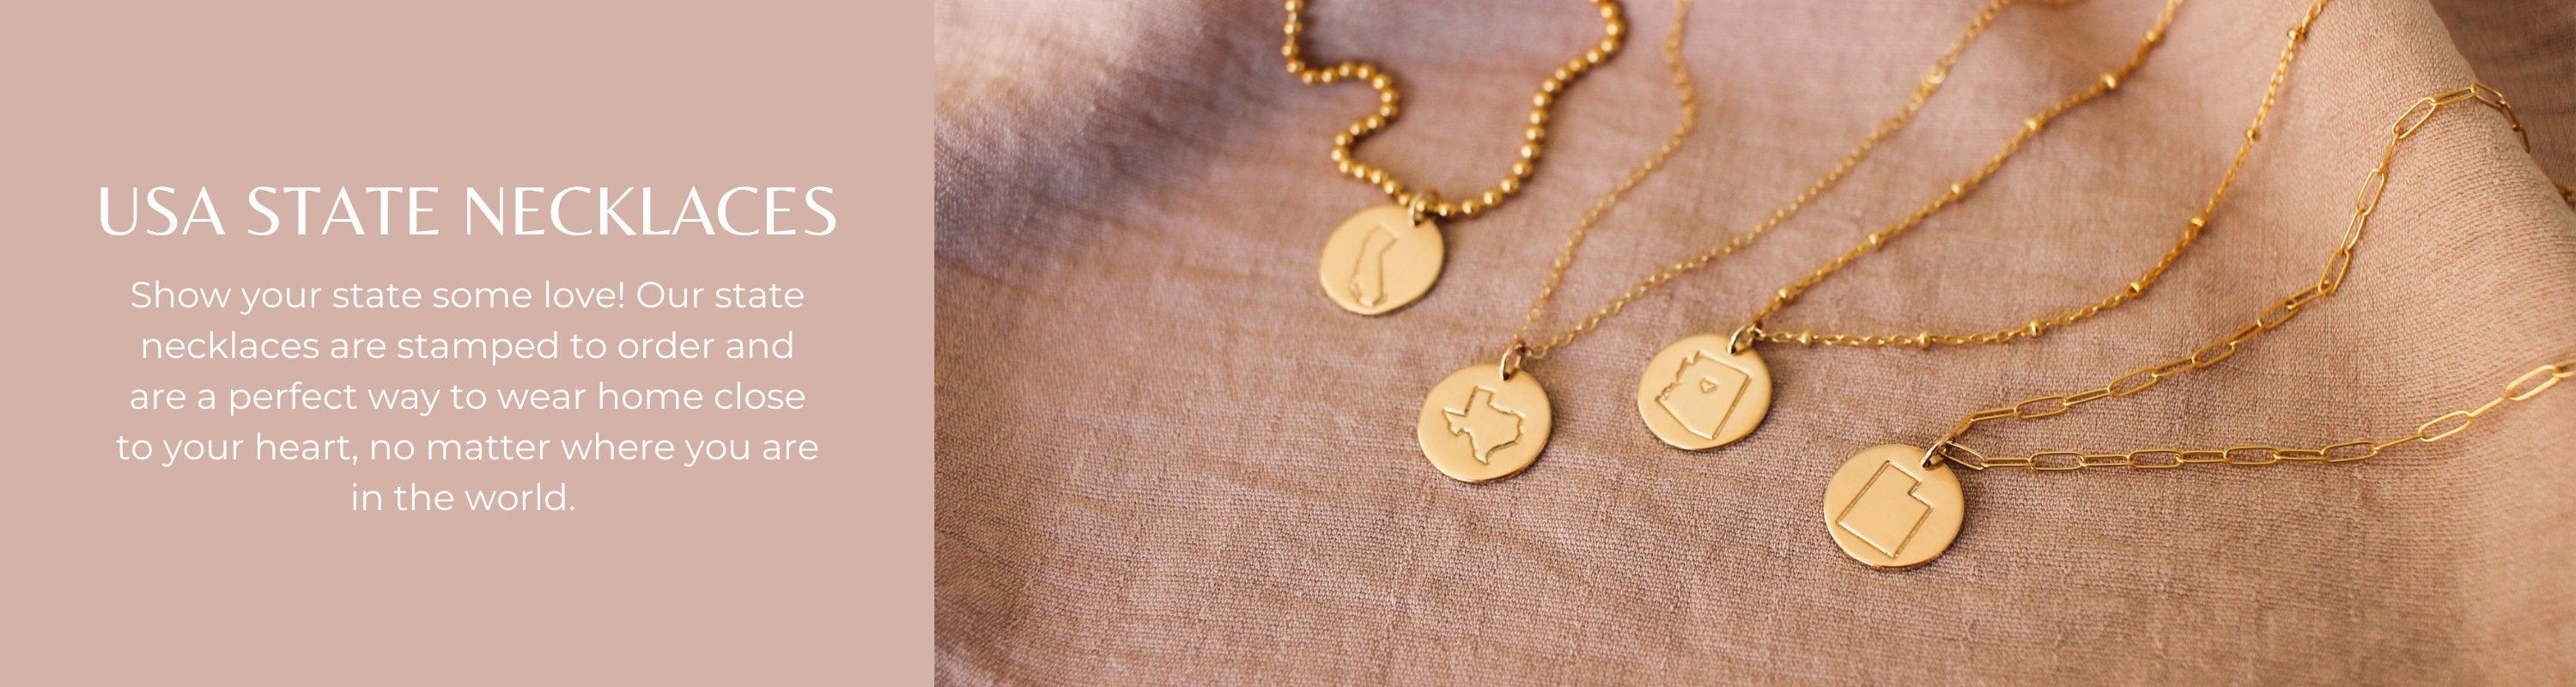 State Necklaces - Nolia Jewelry - Meaningful + Sustainably Handcrafted Jewelry